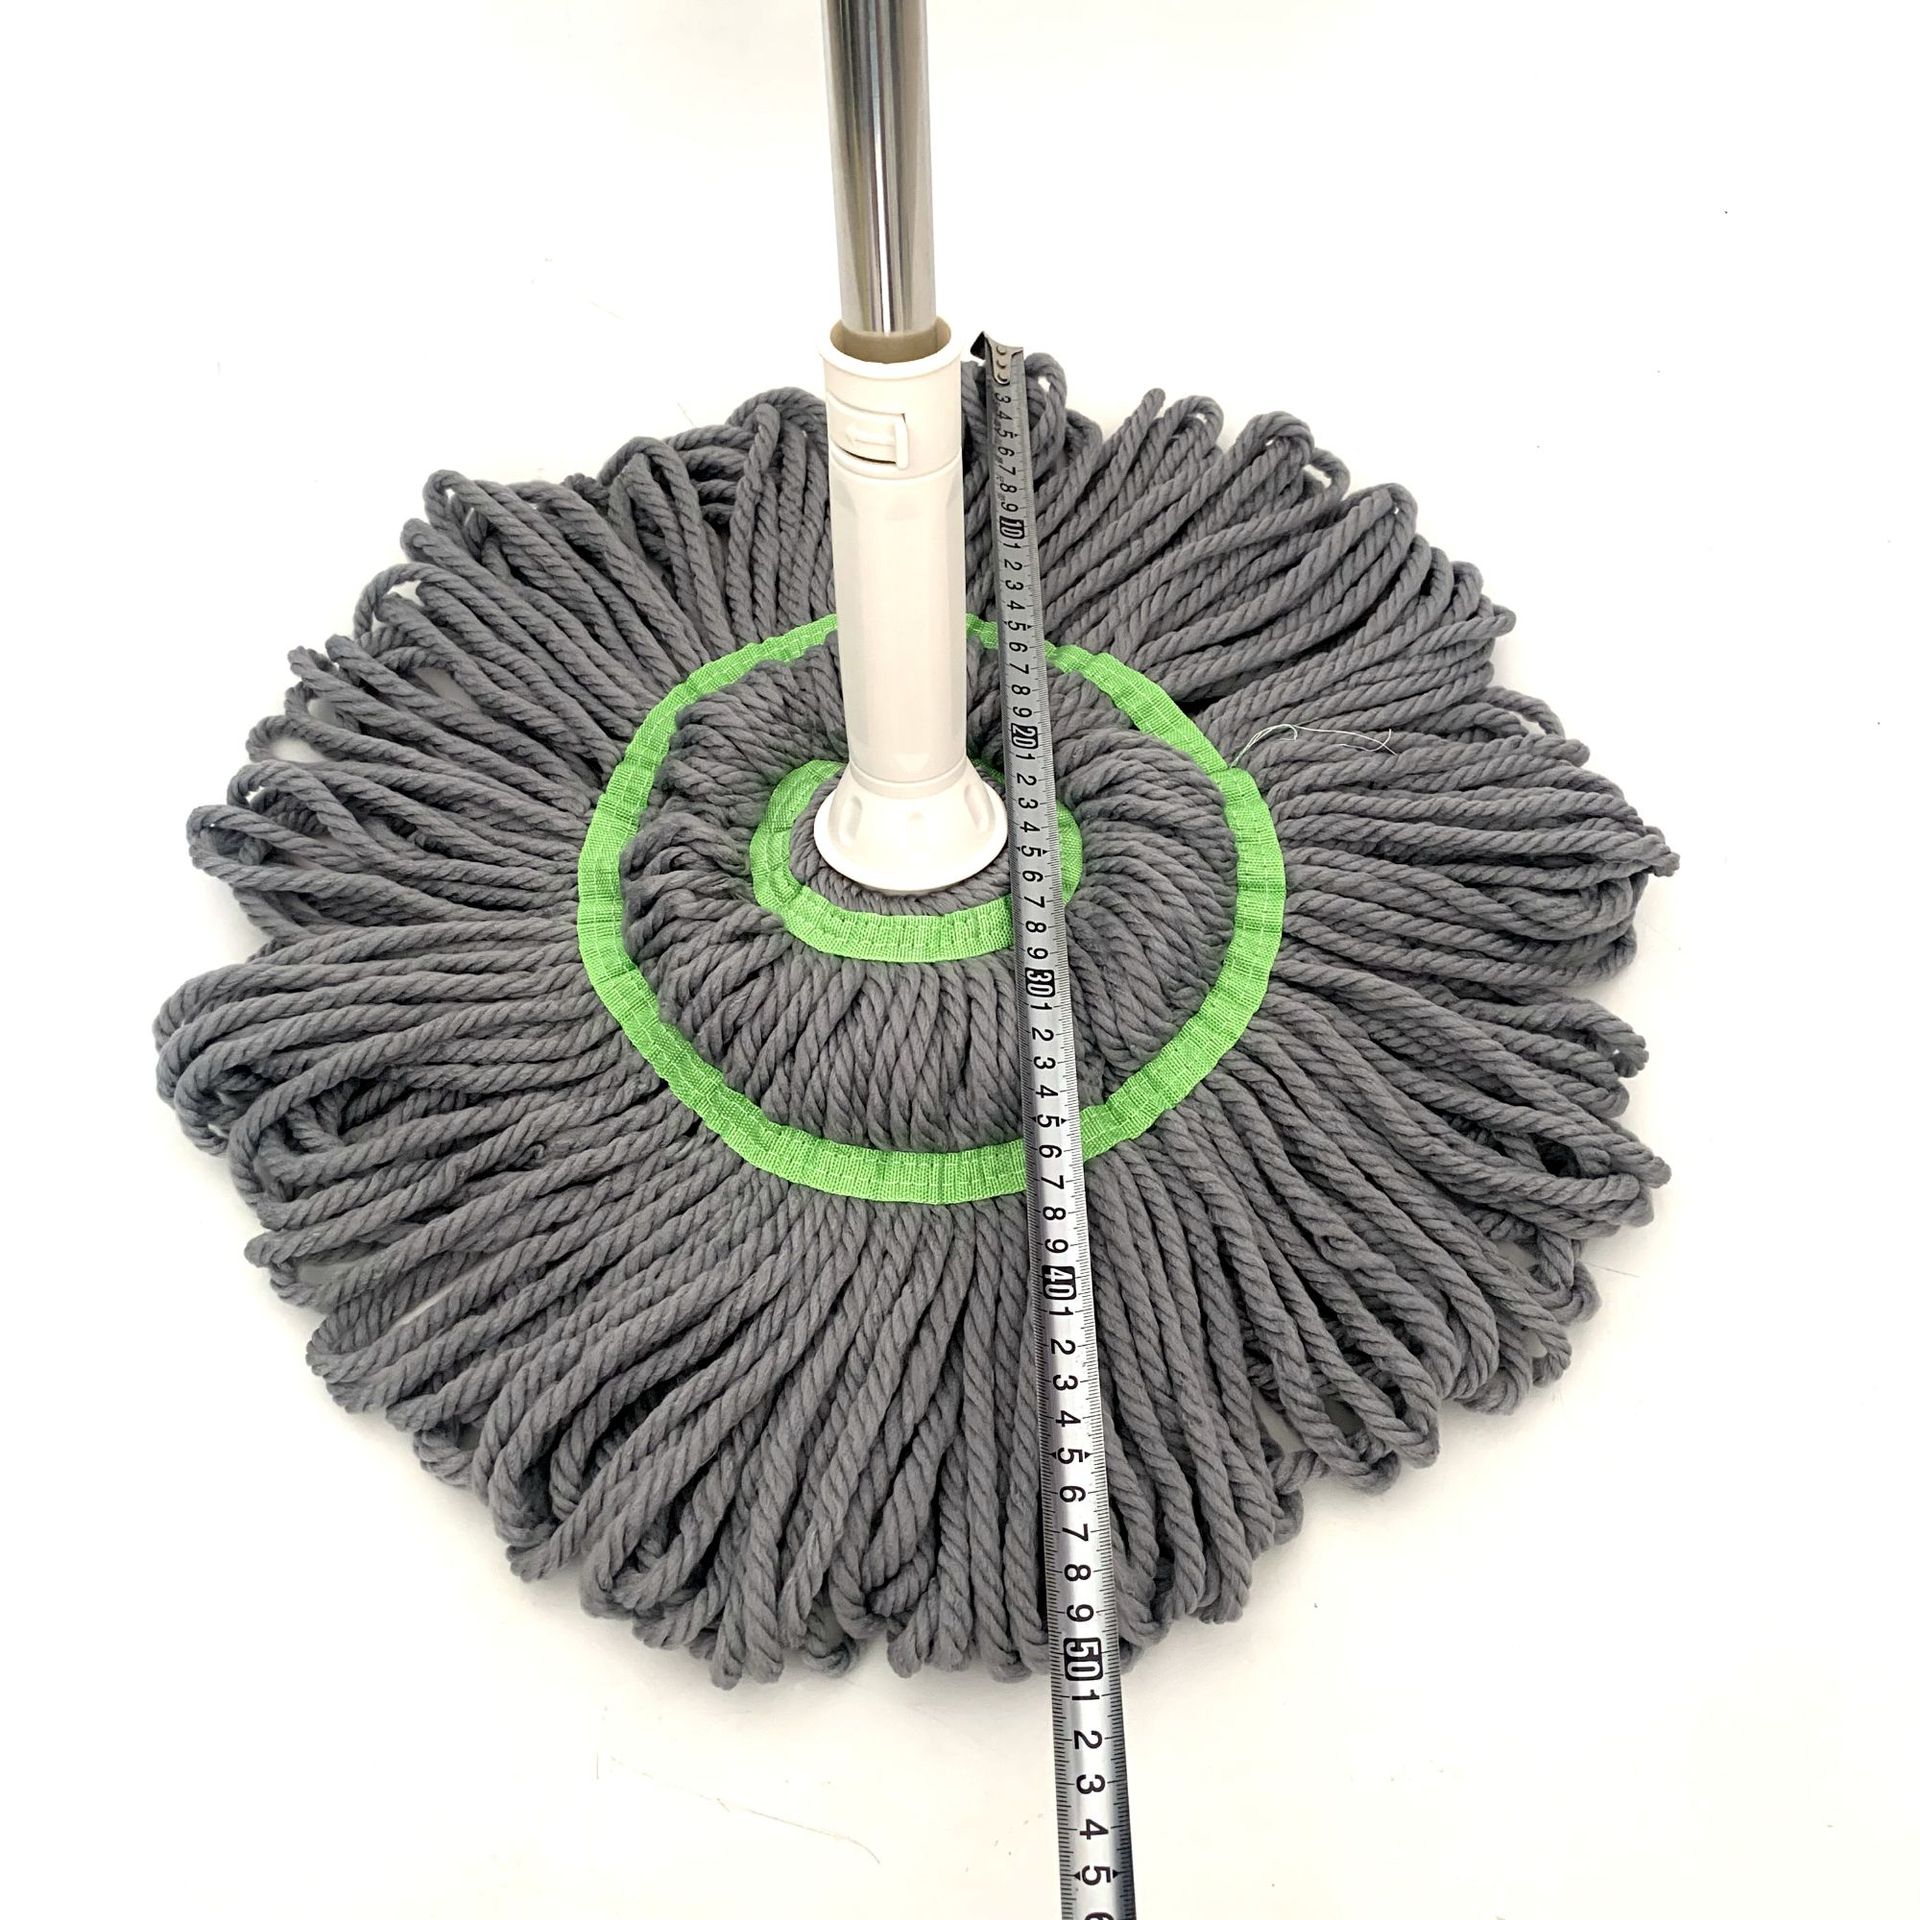 Bicaso Wringing Mop Hand Wash-Free Lazy Mop Household 2021 New Squeeze Rotating Mop Mop Head